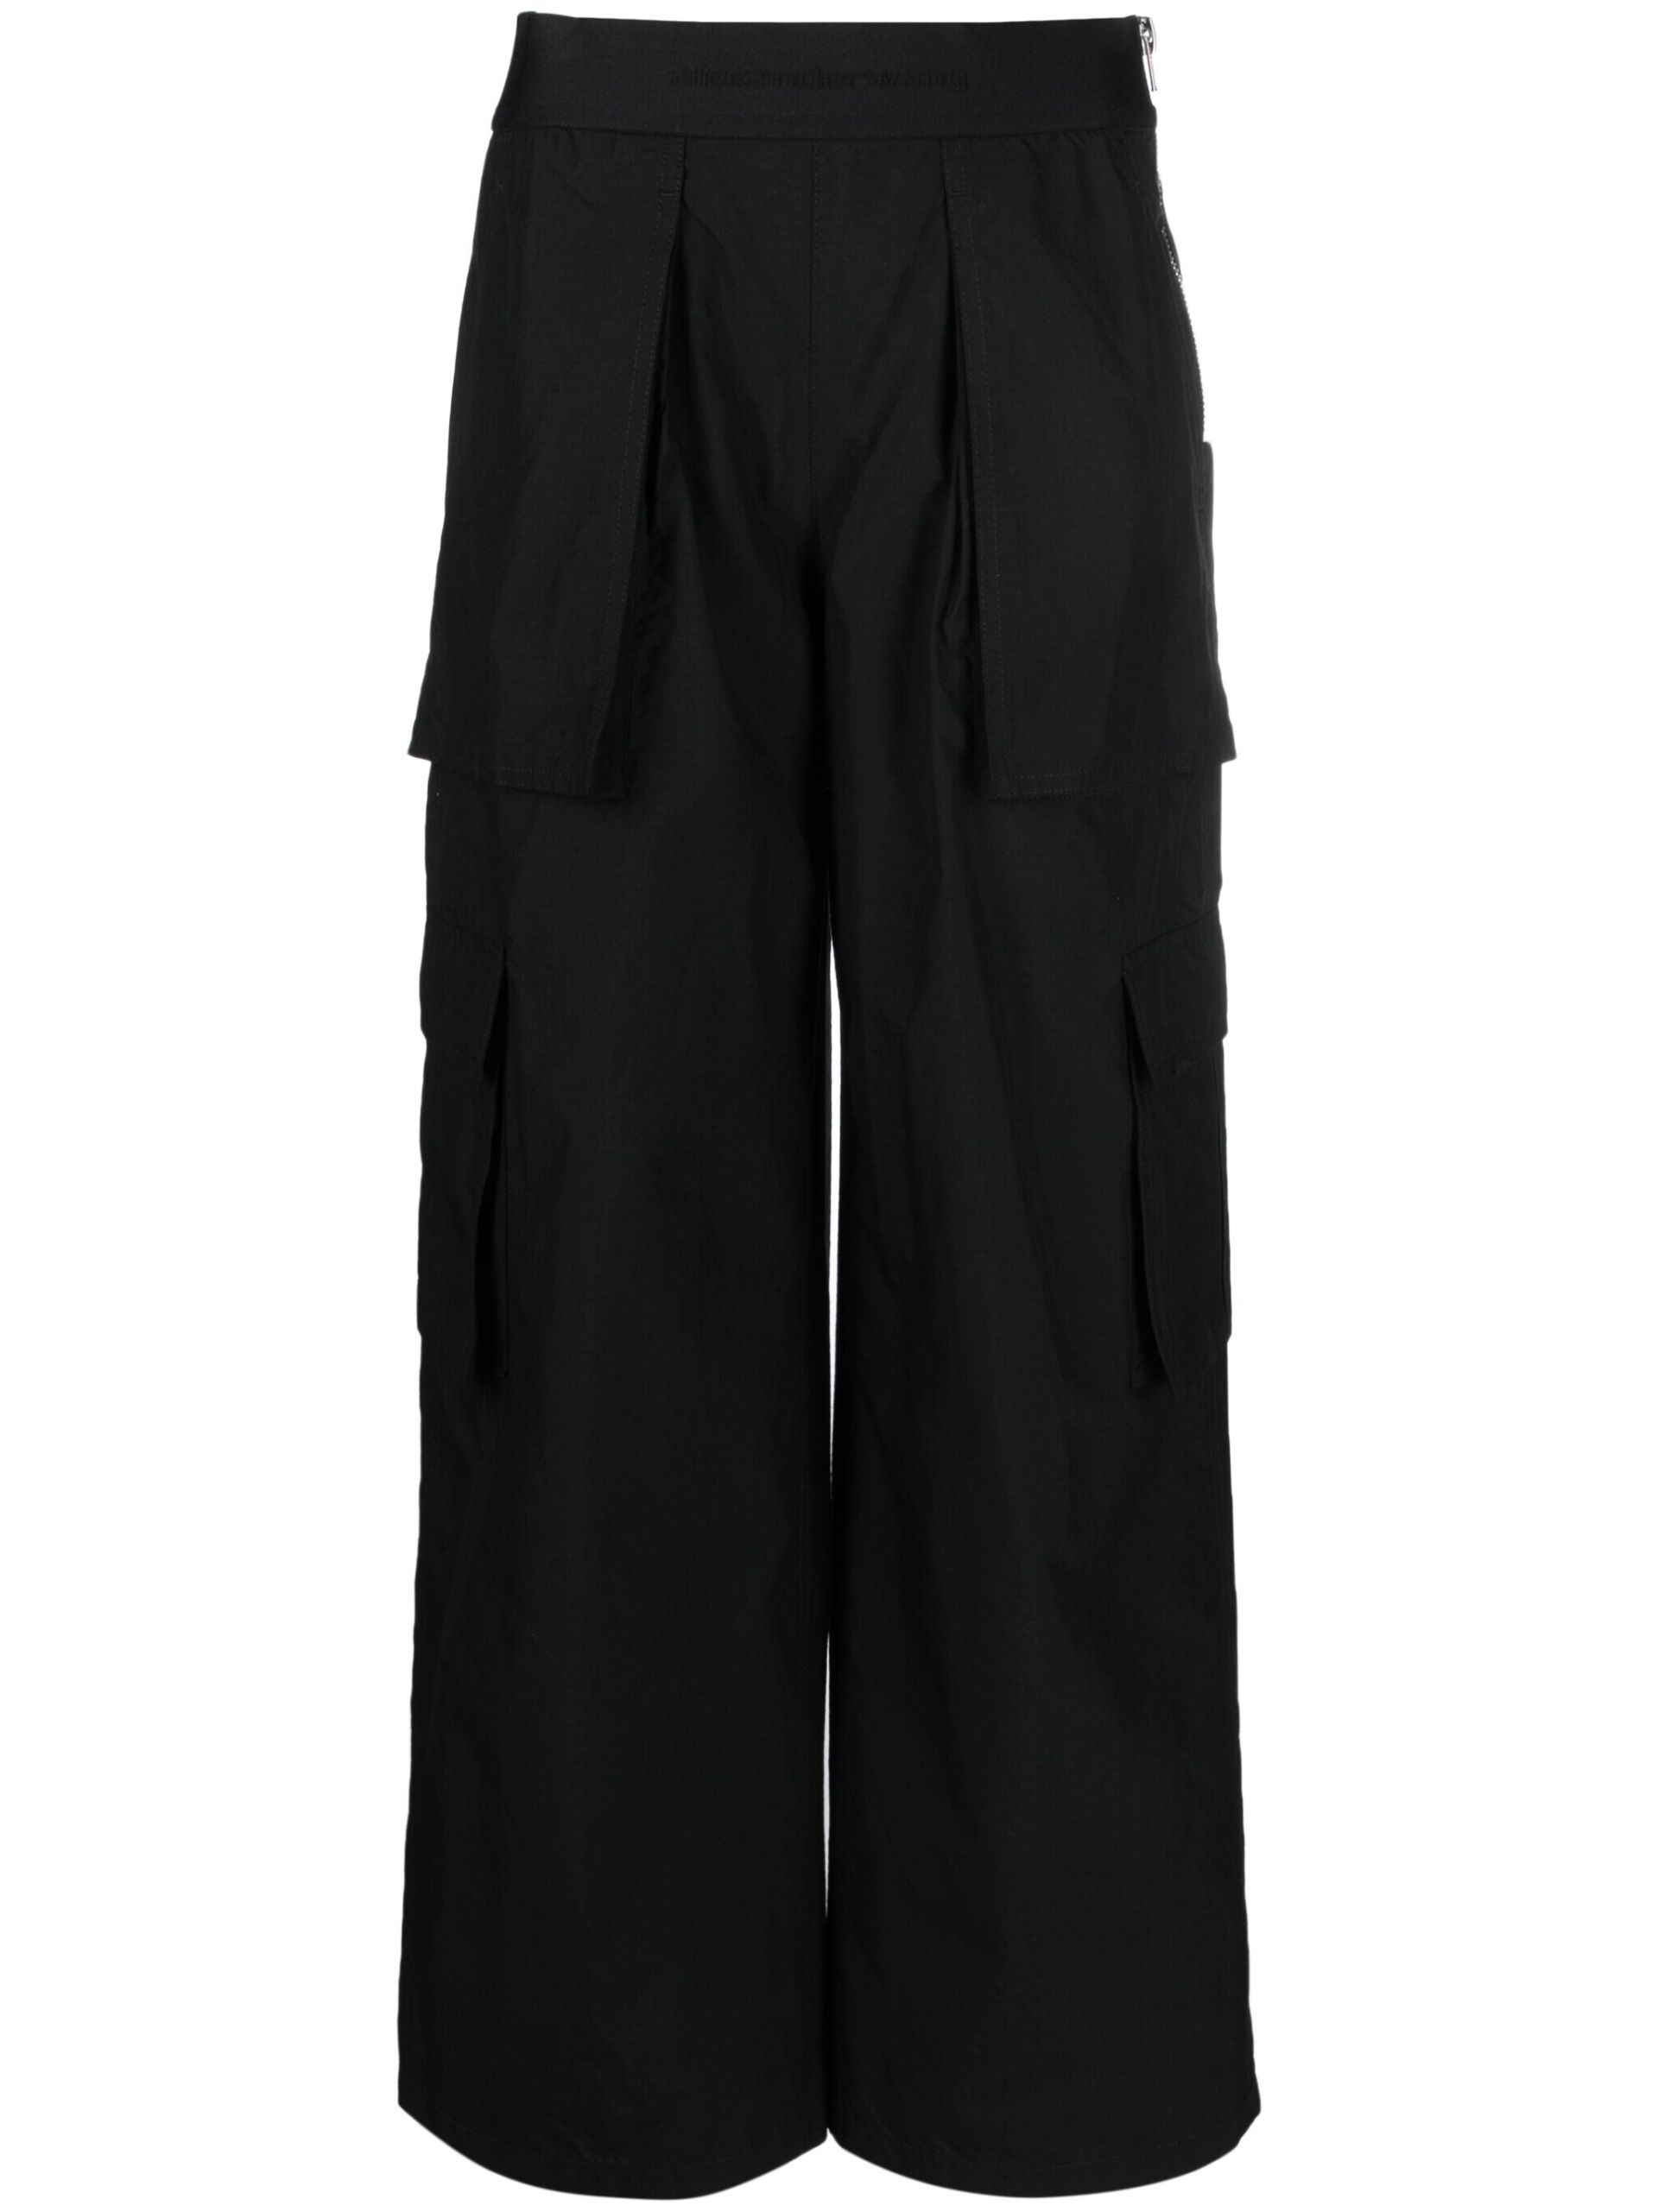 Black Ripstop Cargo Trousers - 1